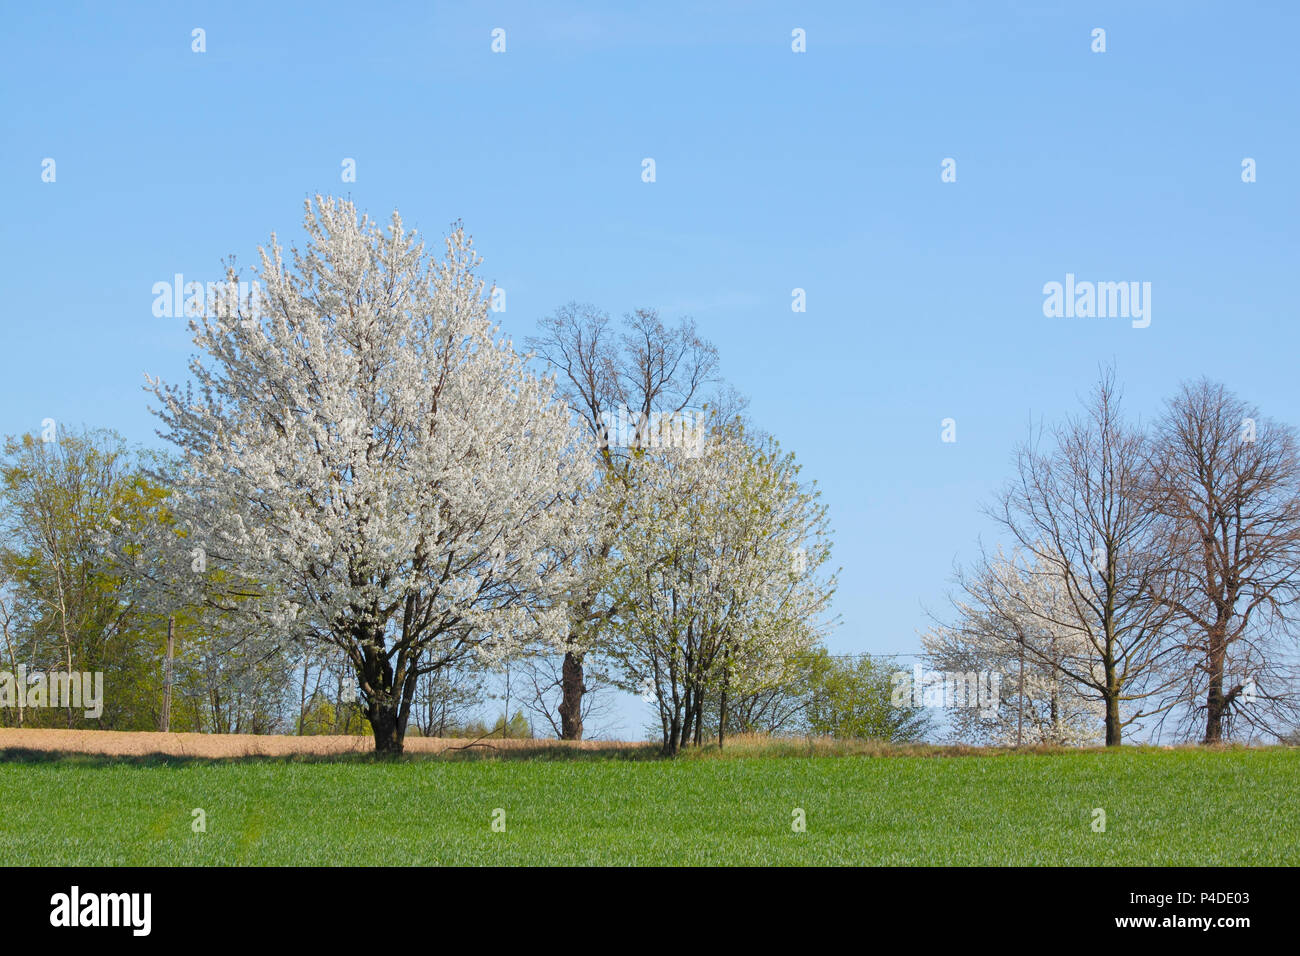 Spring landscape with white flowering trees and blue sky. Poland, The Holy Cross Mountains. Stock Photo